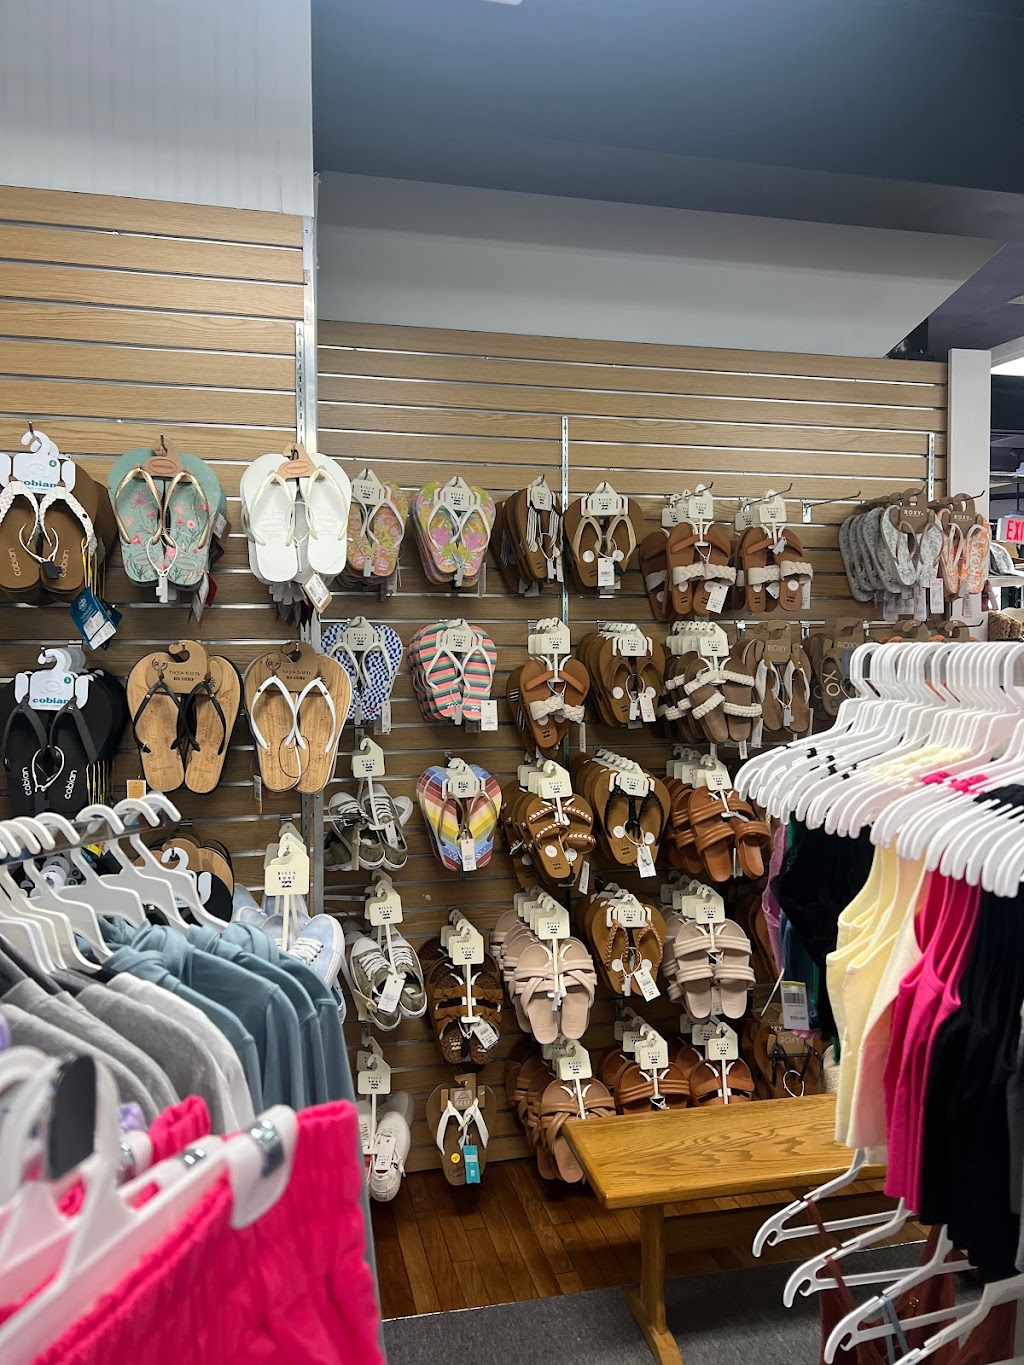 B & B Department Stores | 901 Central Ave, Ship Bottom, NJ 08008 | Phone: (609) 361-0760